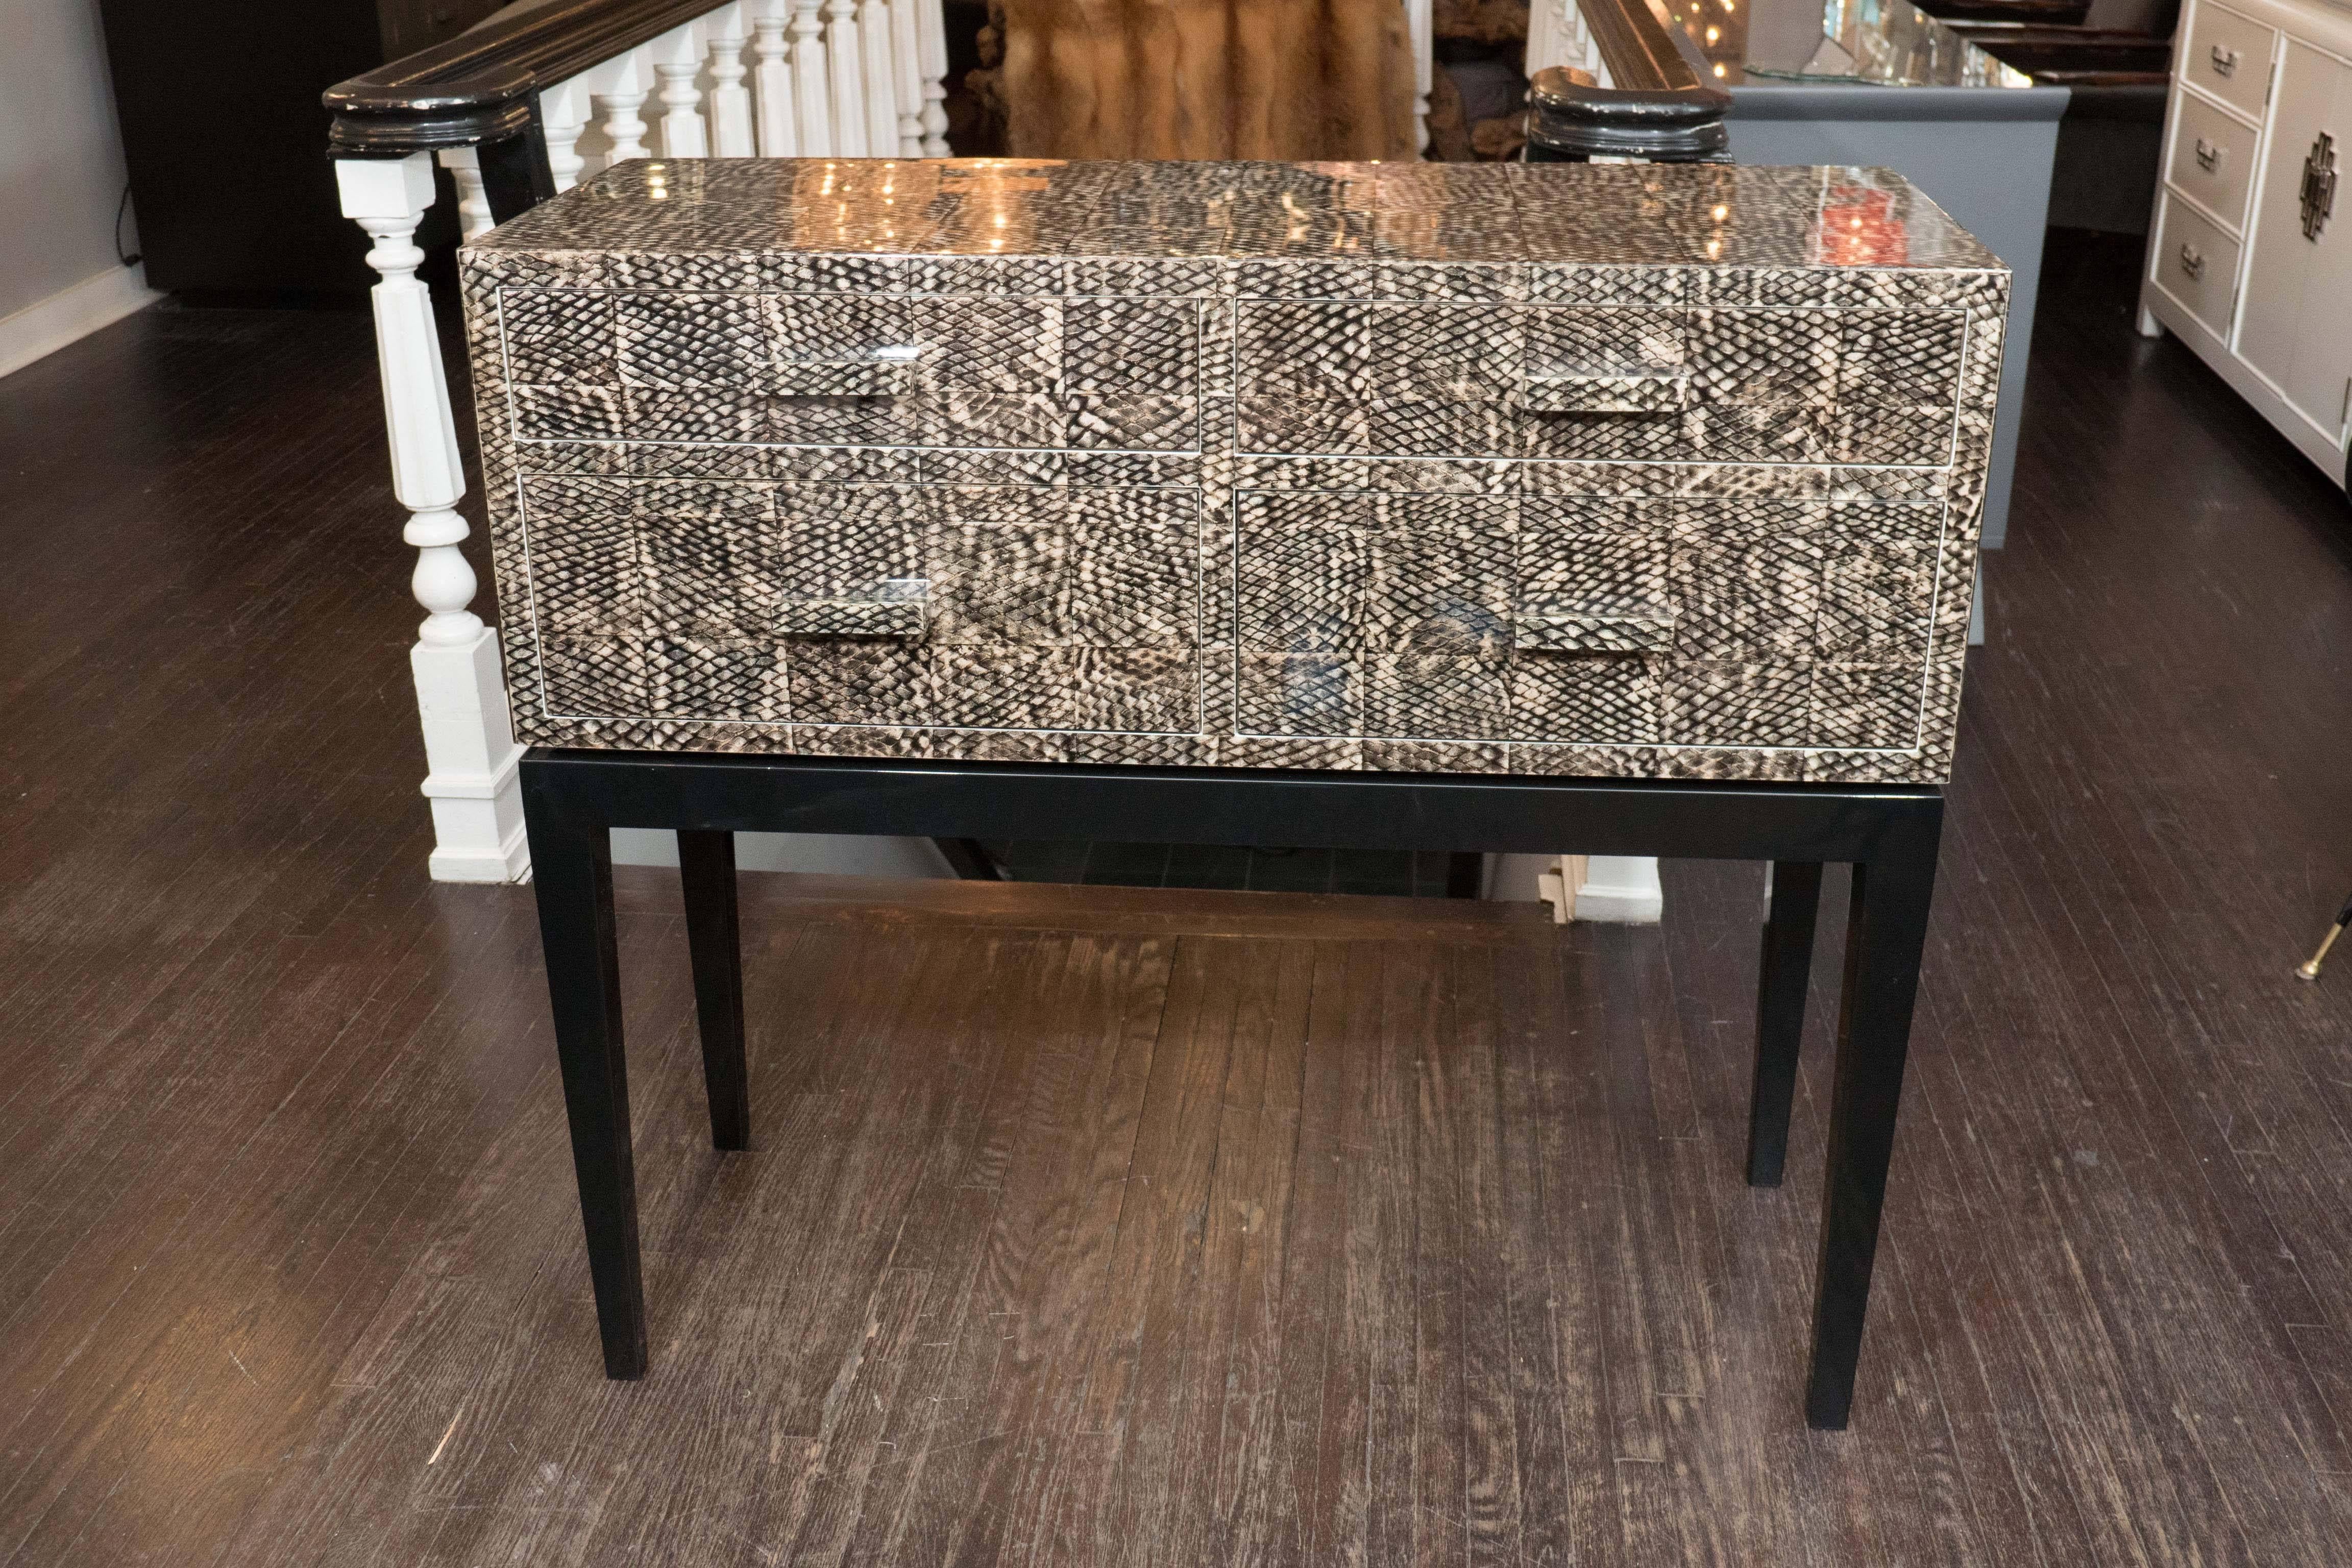 Goldfish skin veneer console table with high-gloss black lacquered base. Customization is available in different sizes and colors.